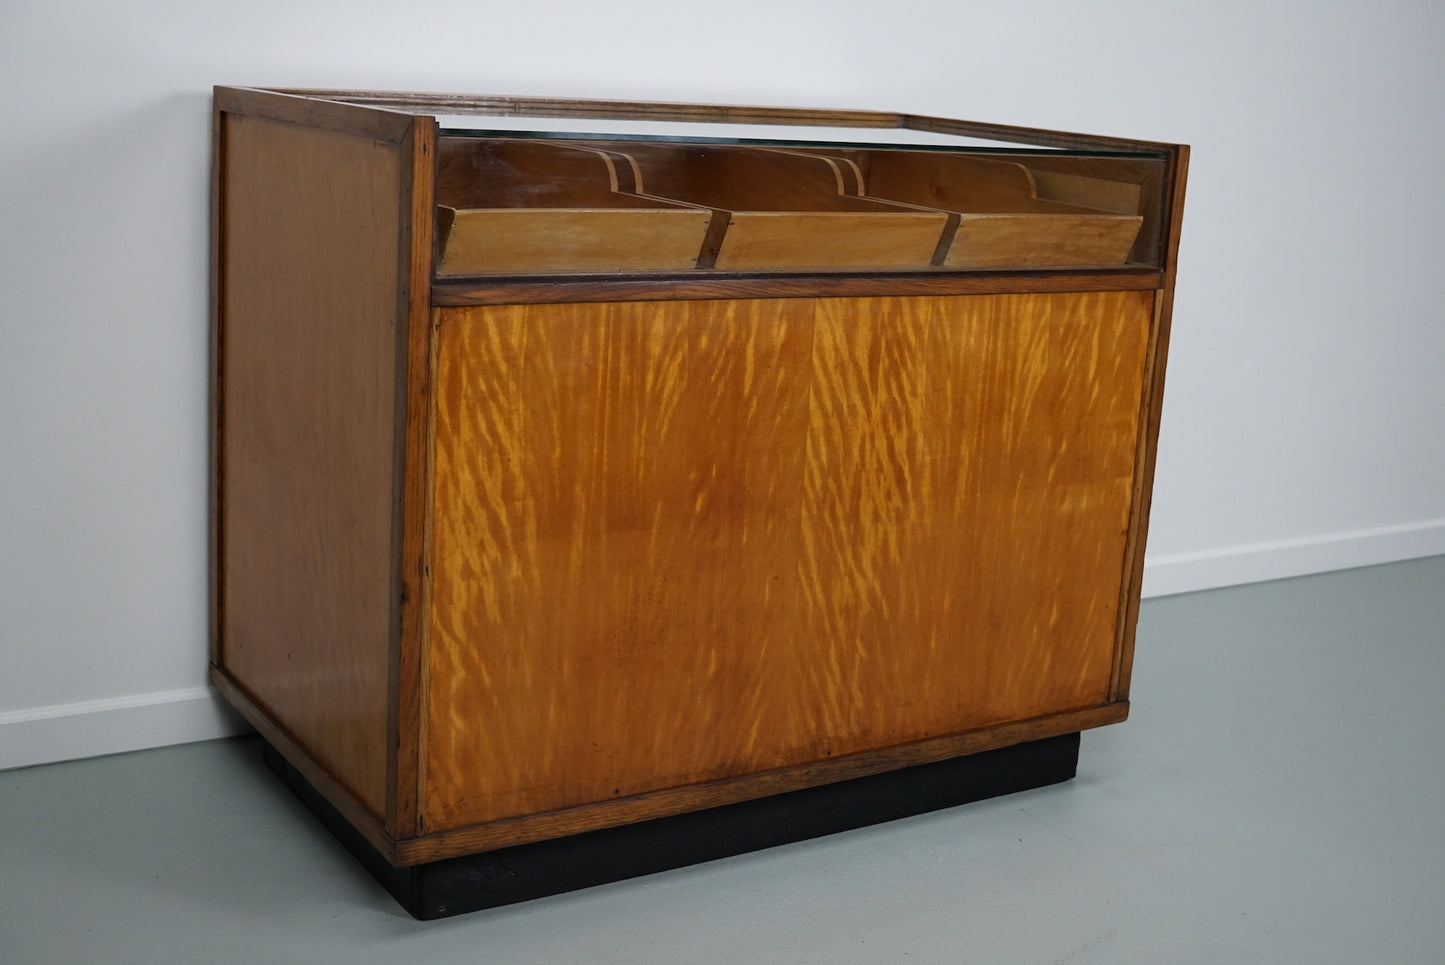 Vintage French Oak Haberdashery Cabinet or Shop Counter, 1950s